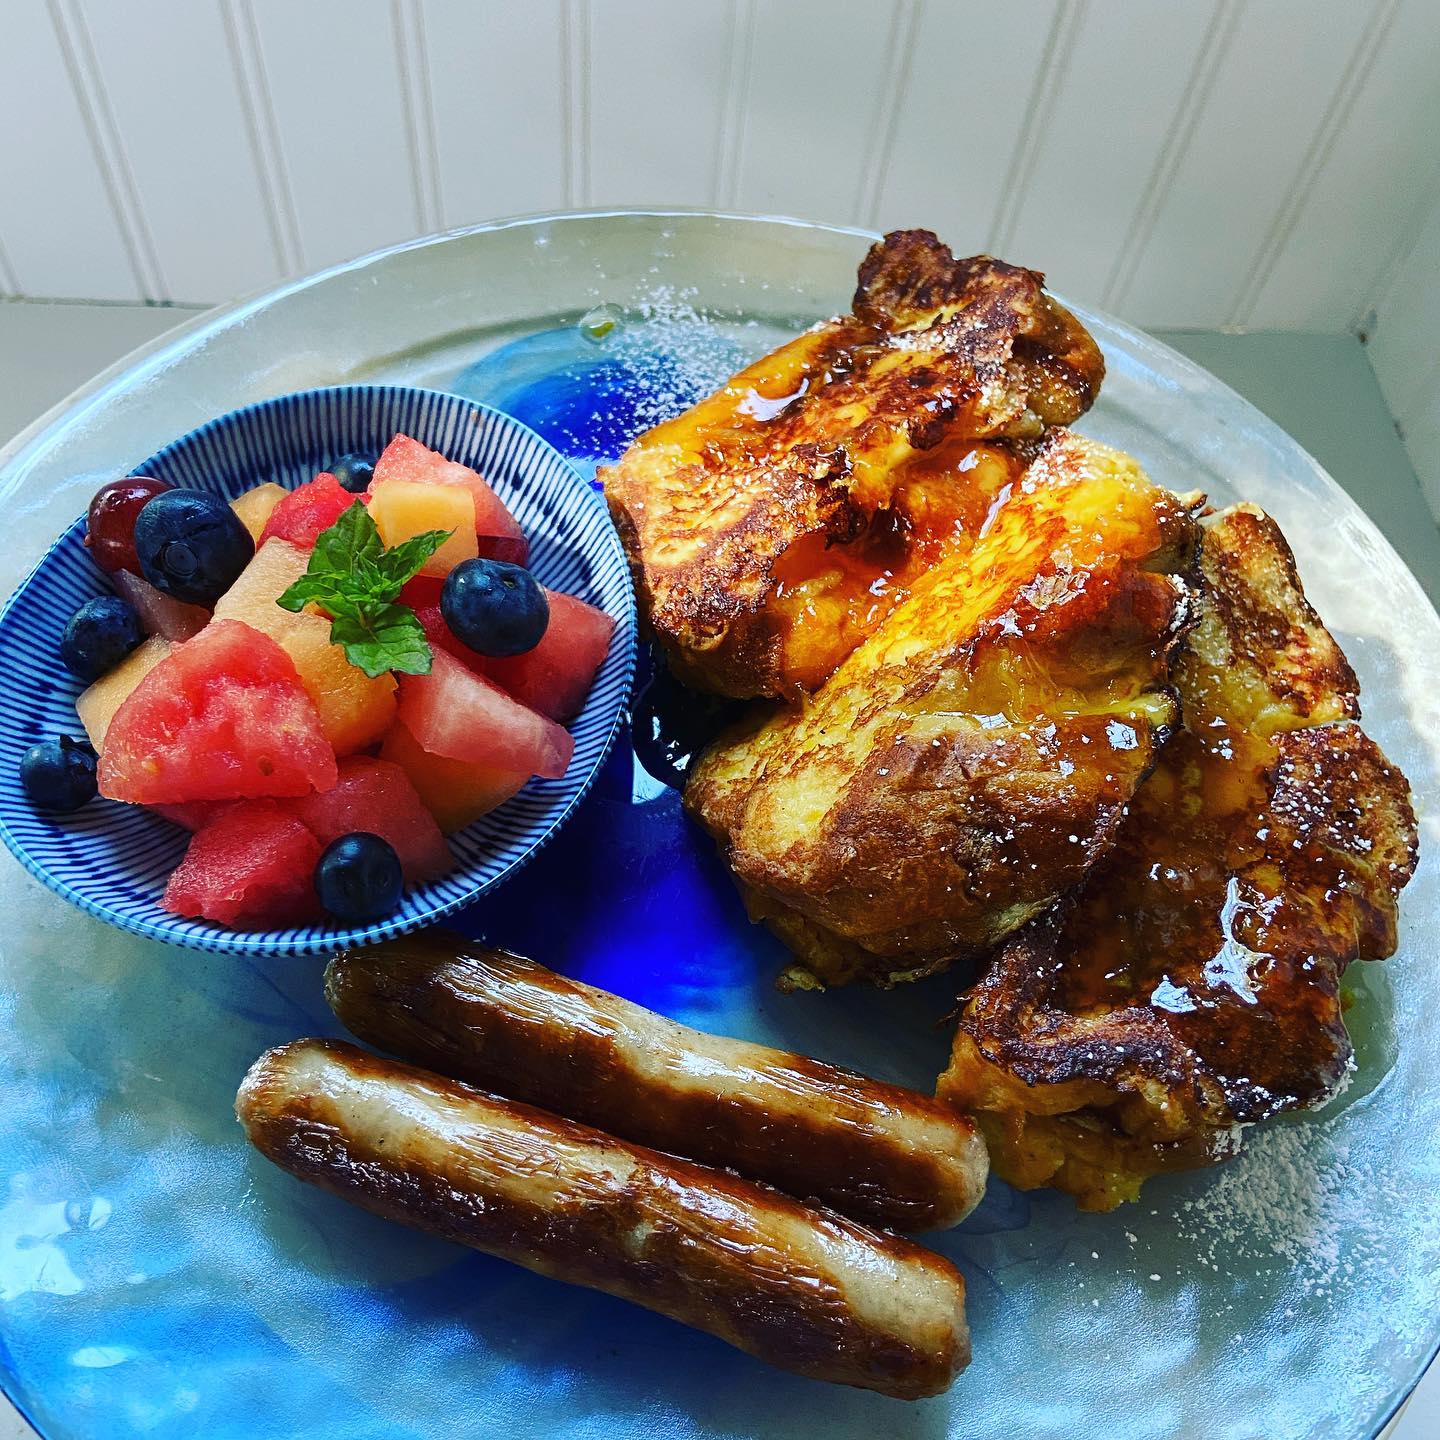 Orange glazed challah French toast with good sausages.